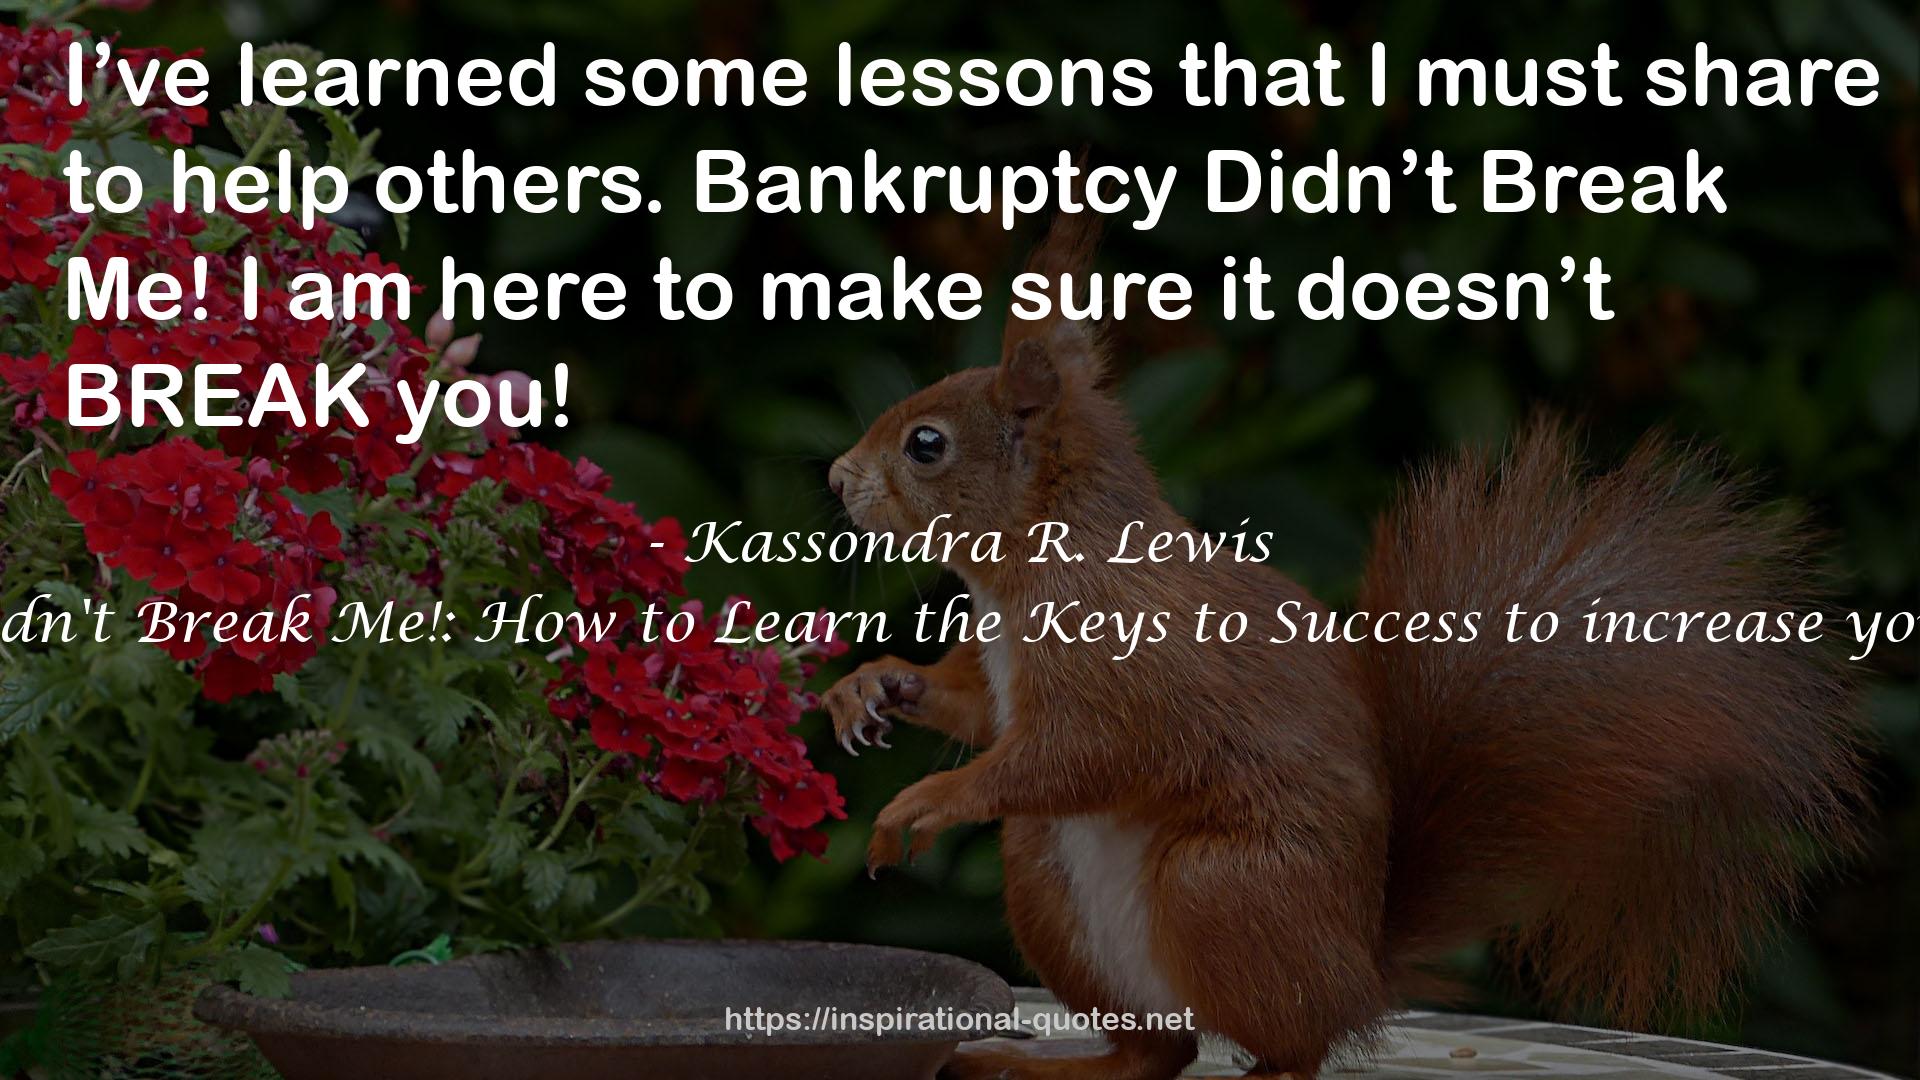 Bankruptcy Didn't Break Me!: How to Learn the Keys to Success to increase your credit scores QUOTES